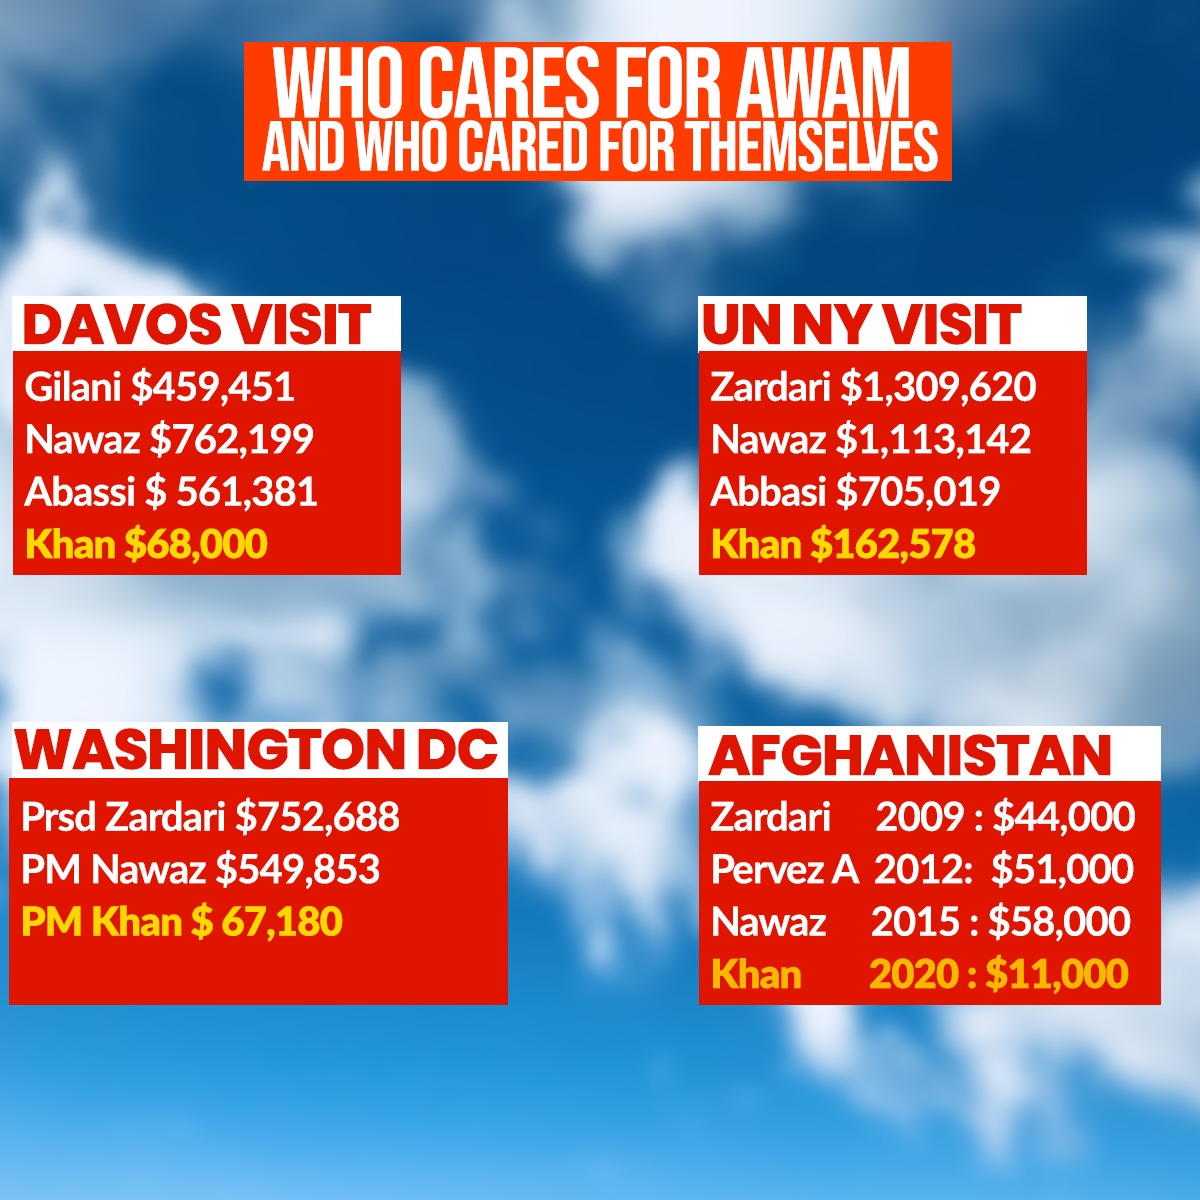 Expenditures on foreign visits by heads of state.